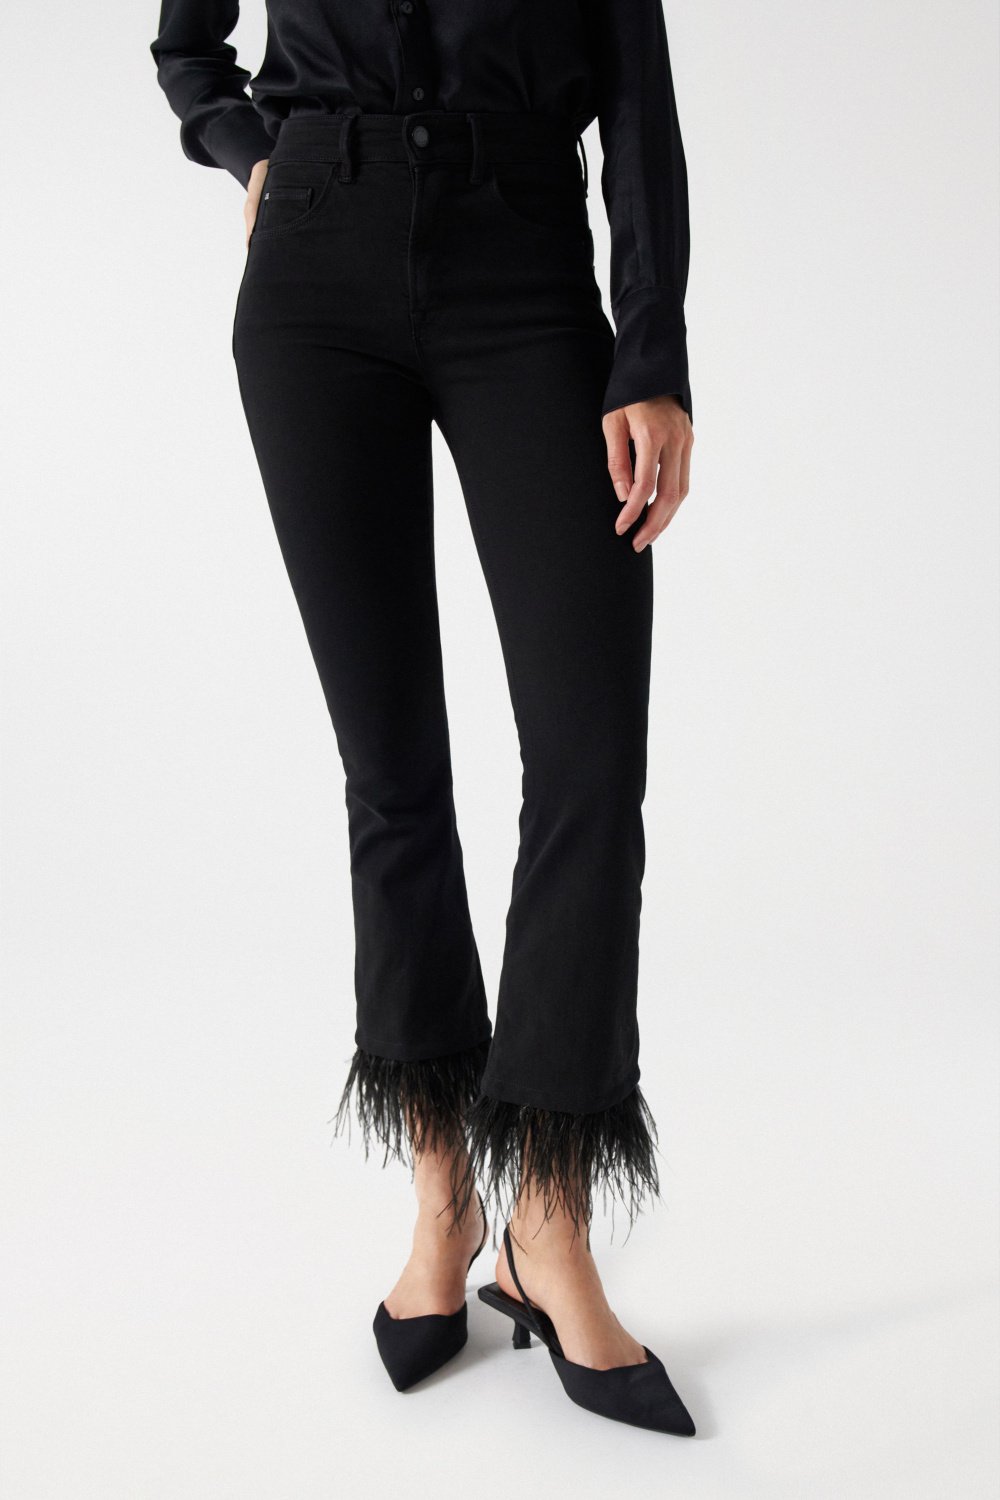 Faith Push In jeans with feathers - Salsa